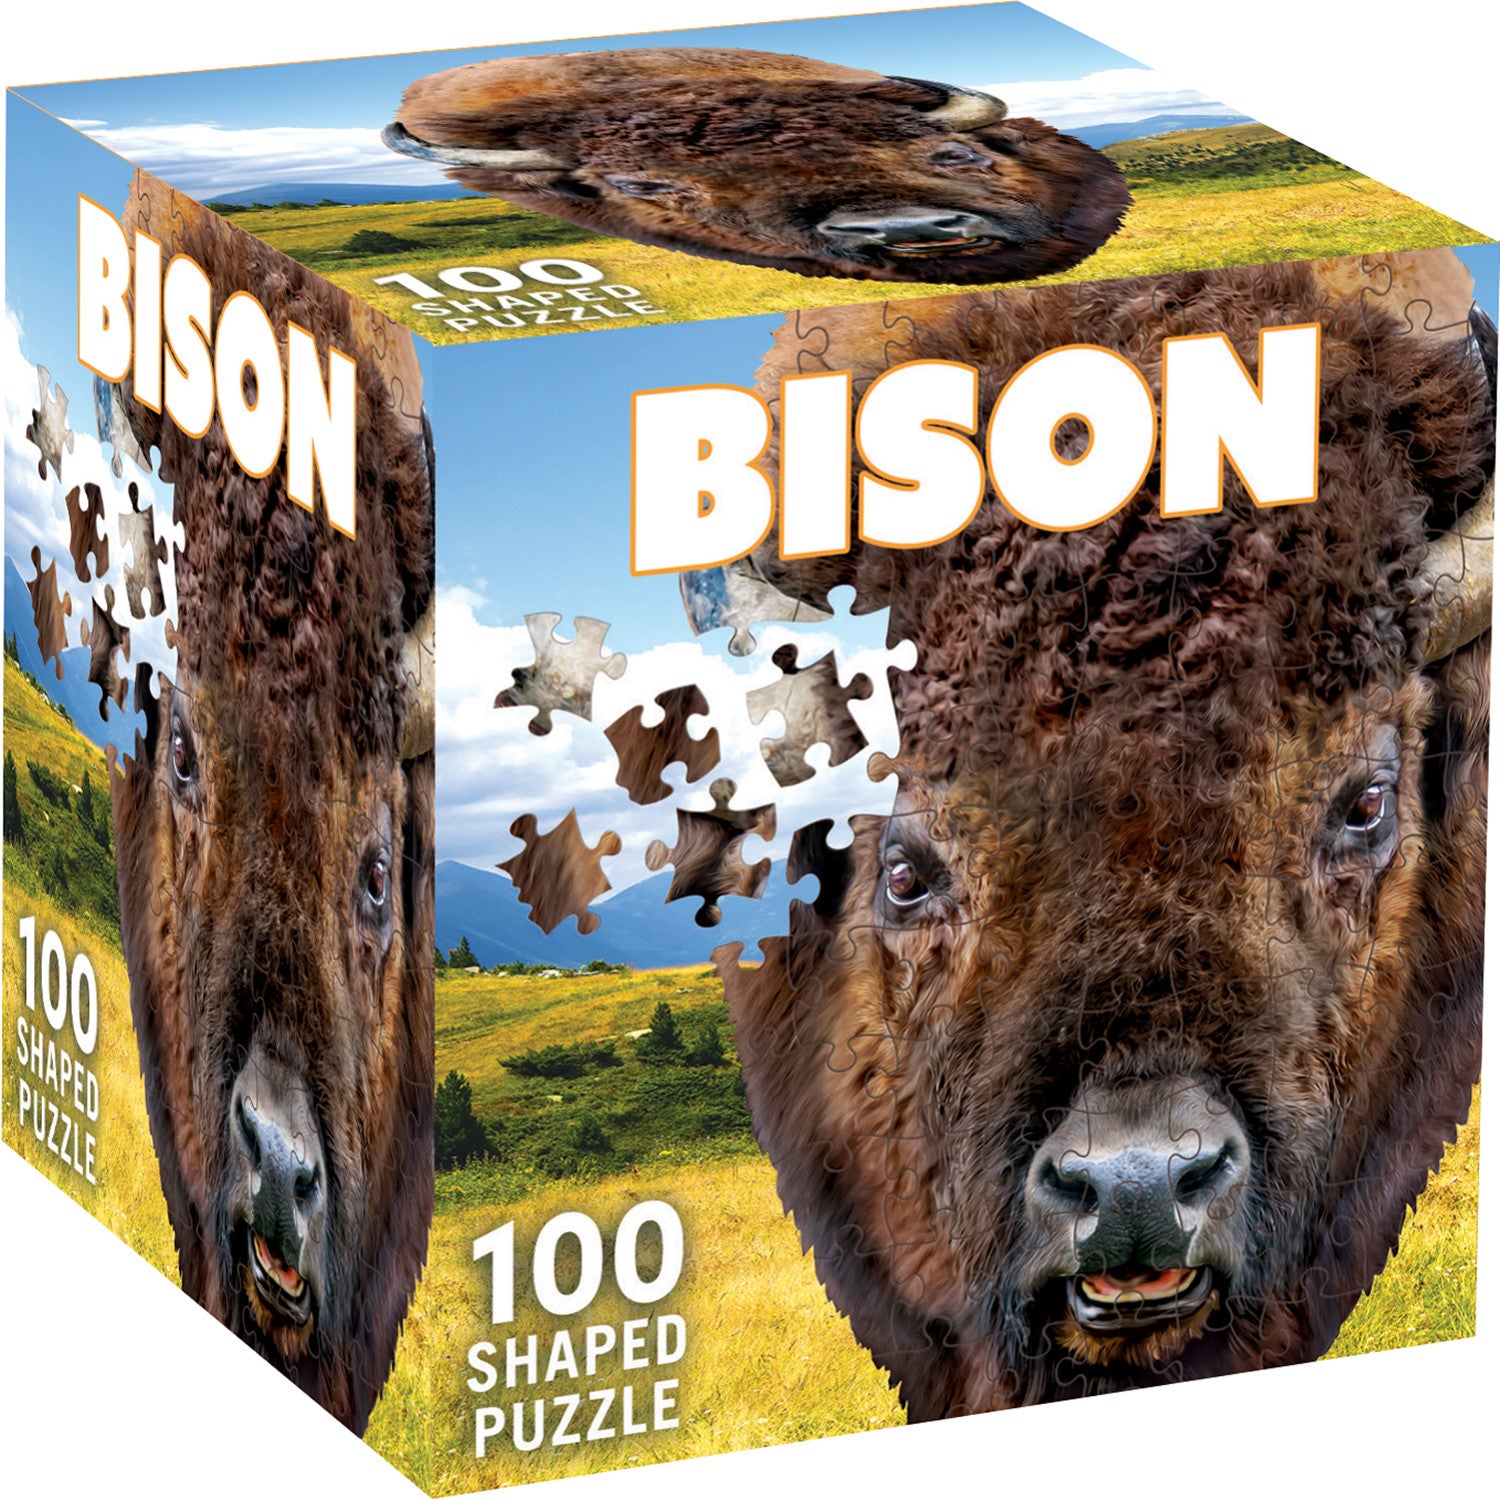 Bison 100 Piece Shaped Jigsaw Puzzle